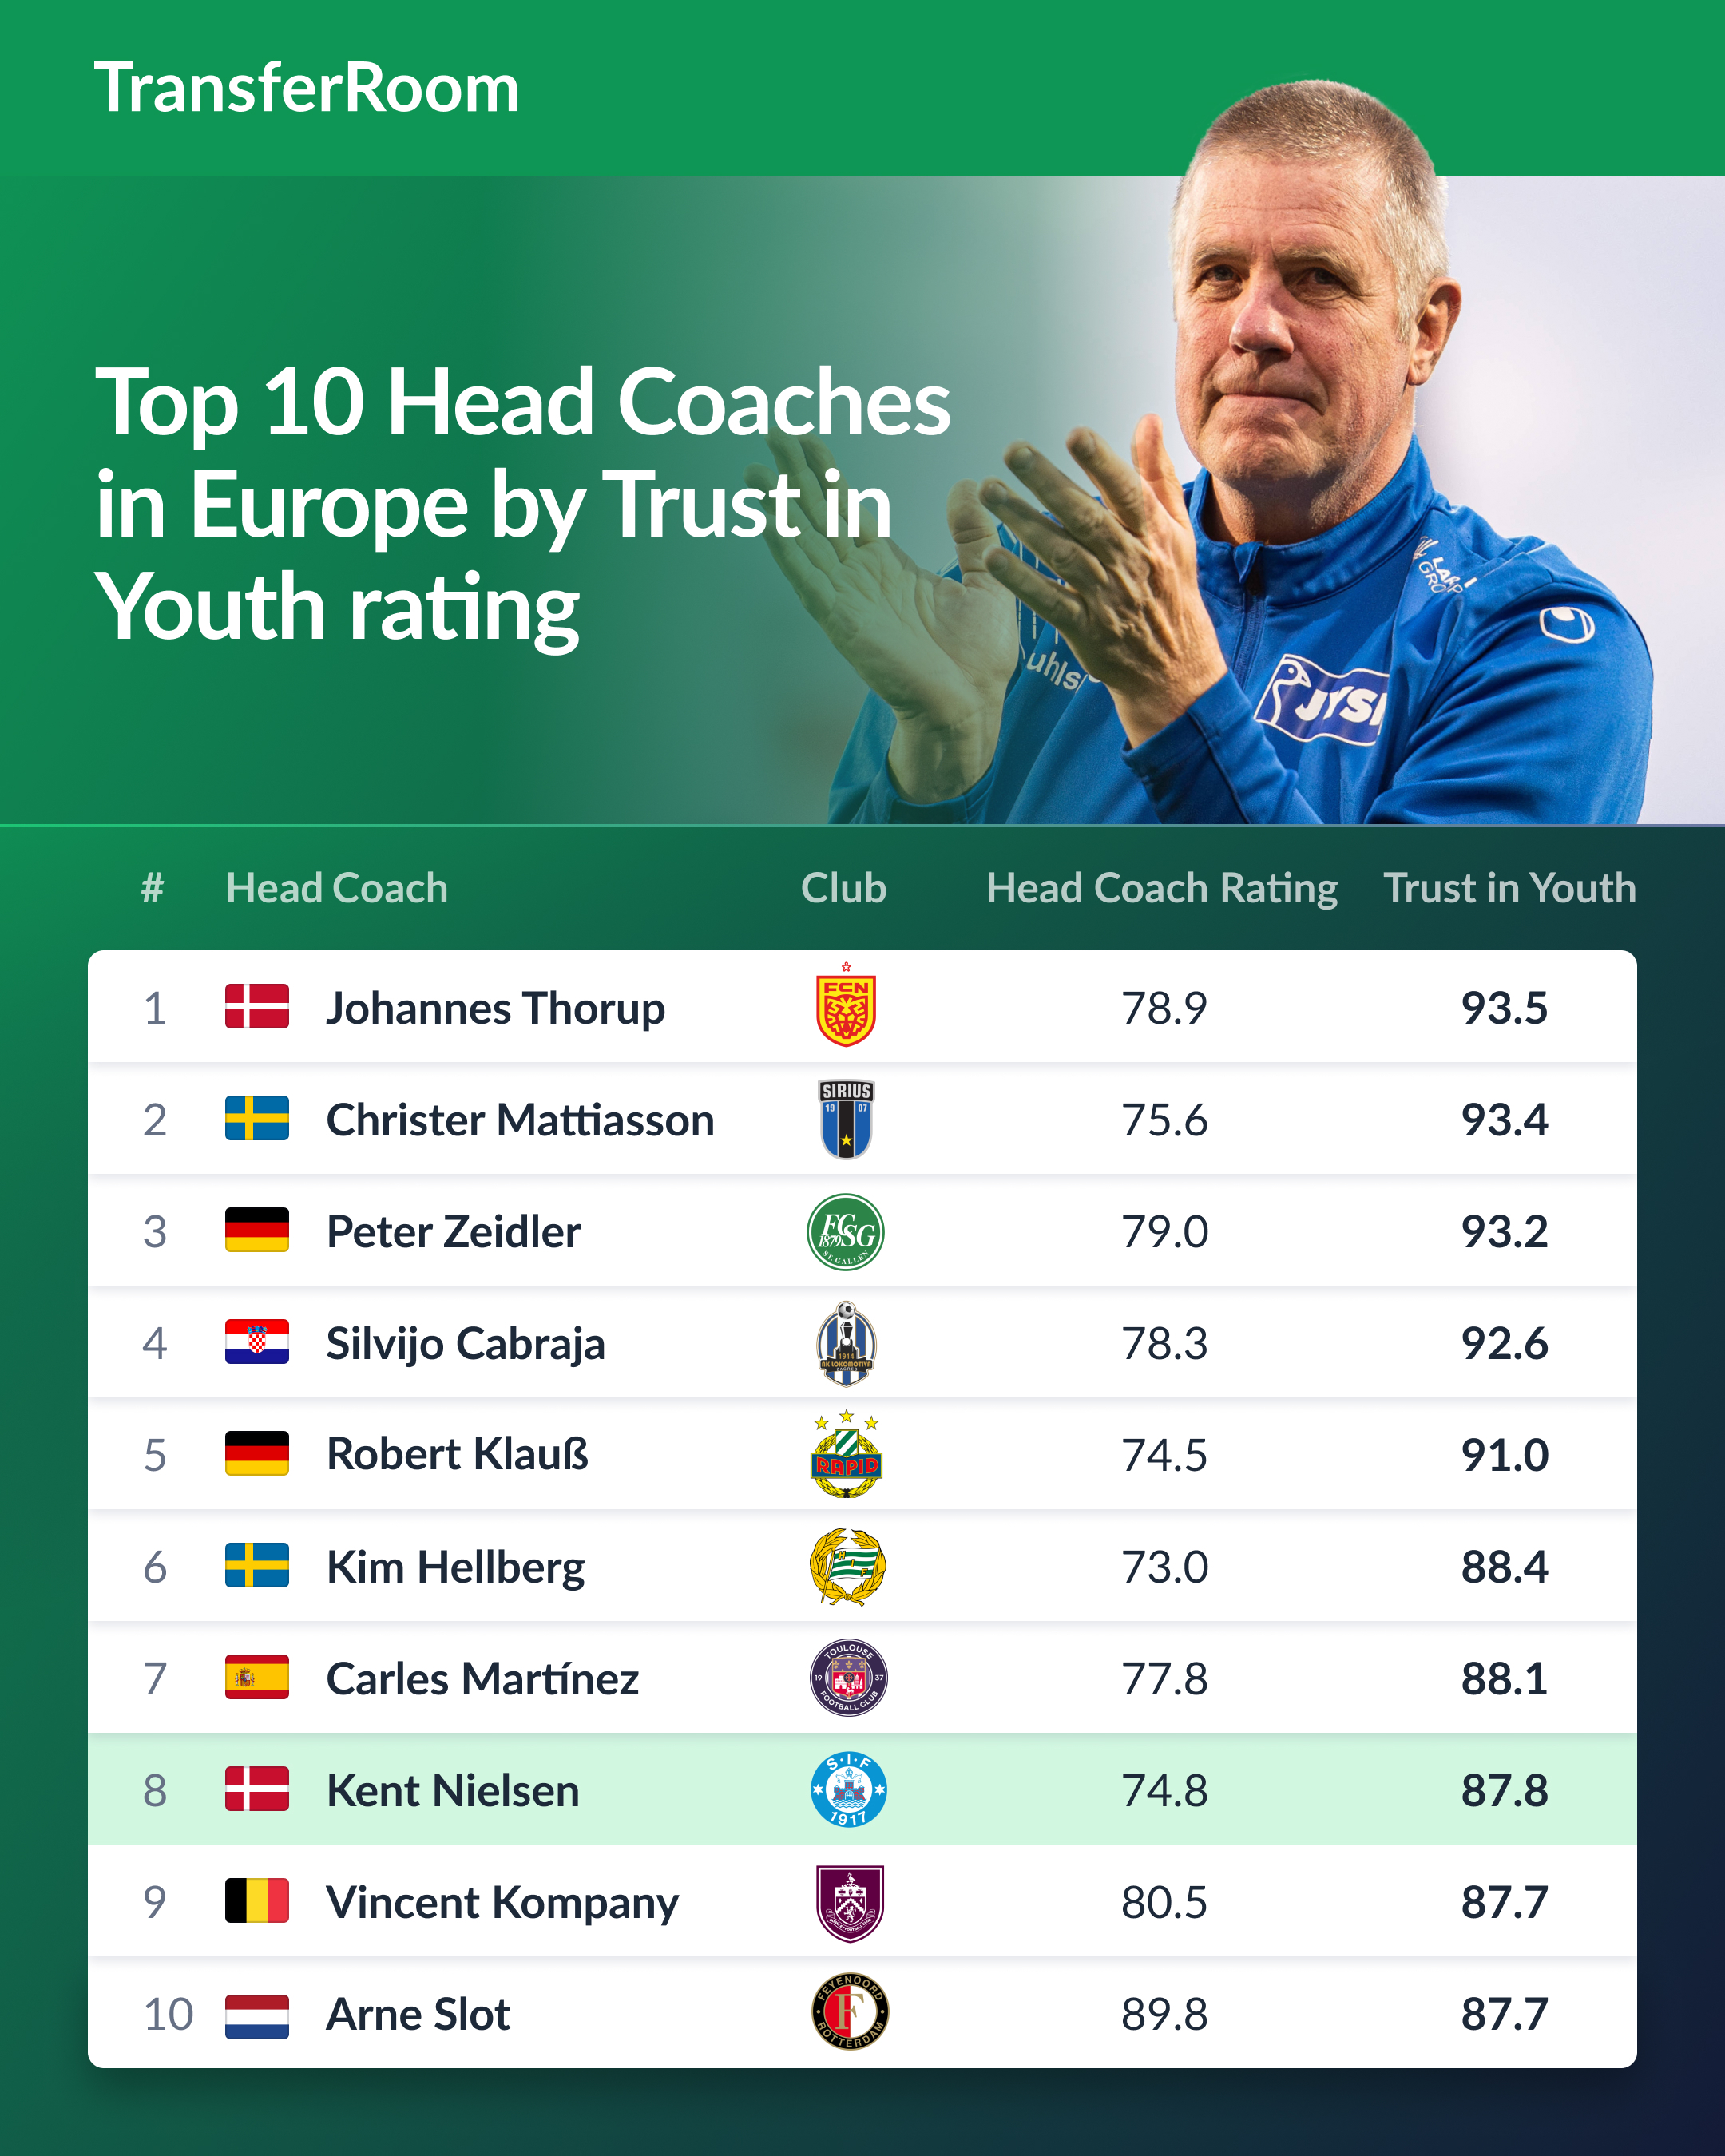 Top 10 Head Coaches in Europe by Trust in Youth Rating